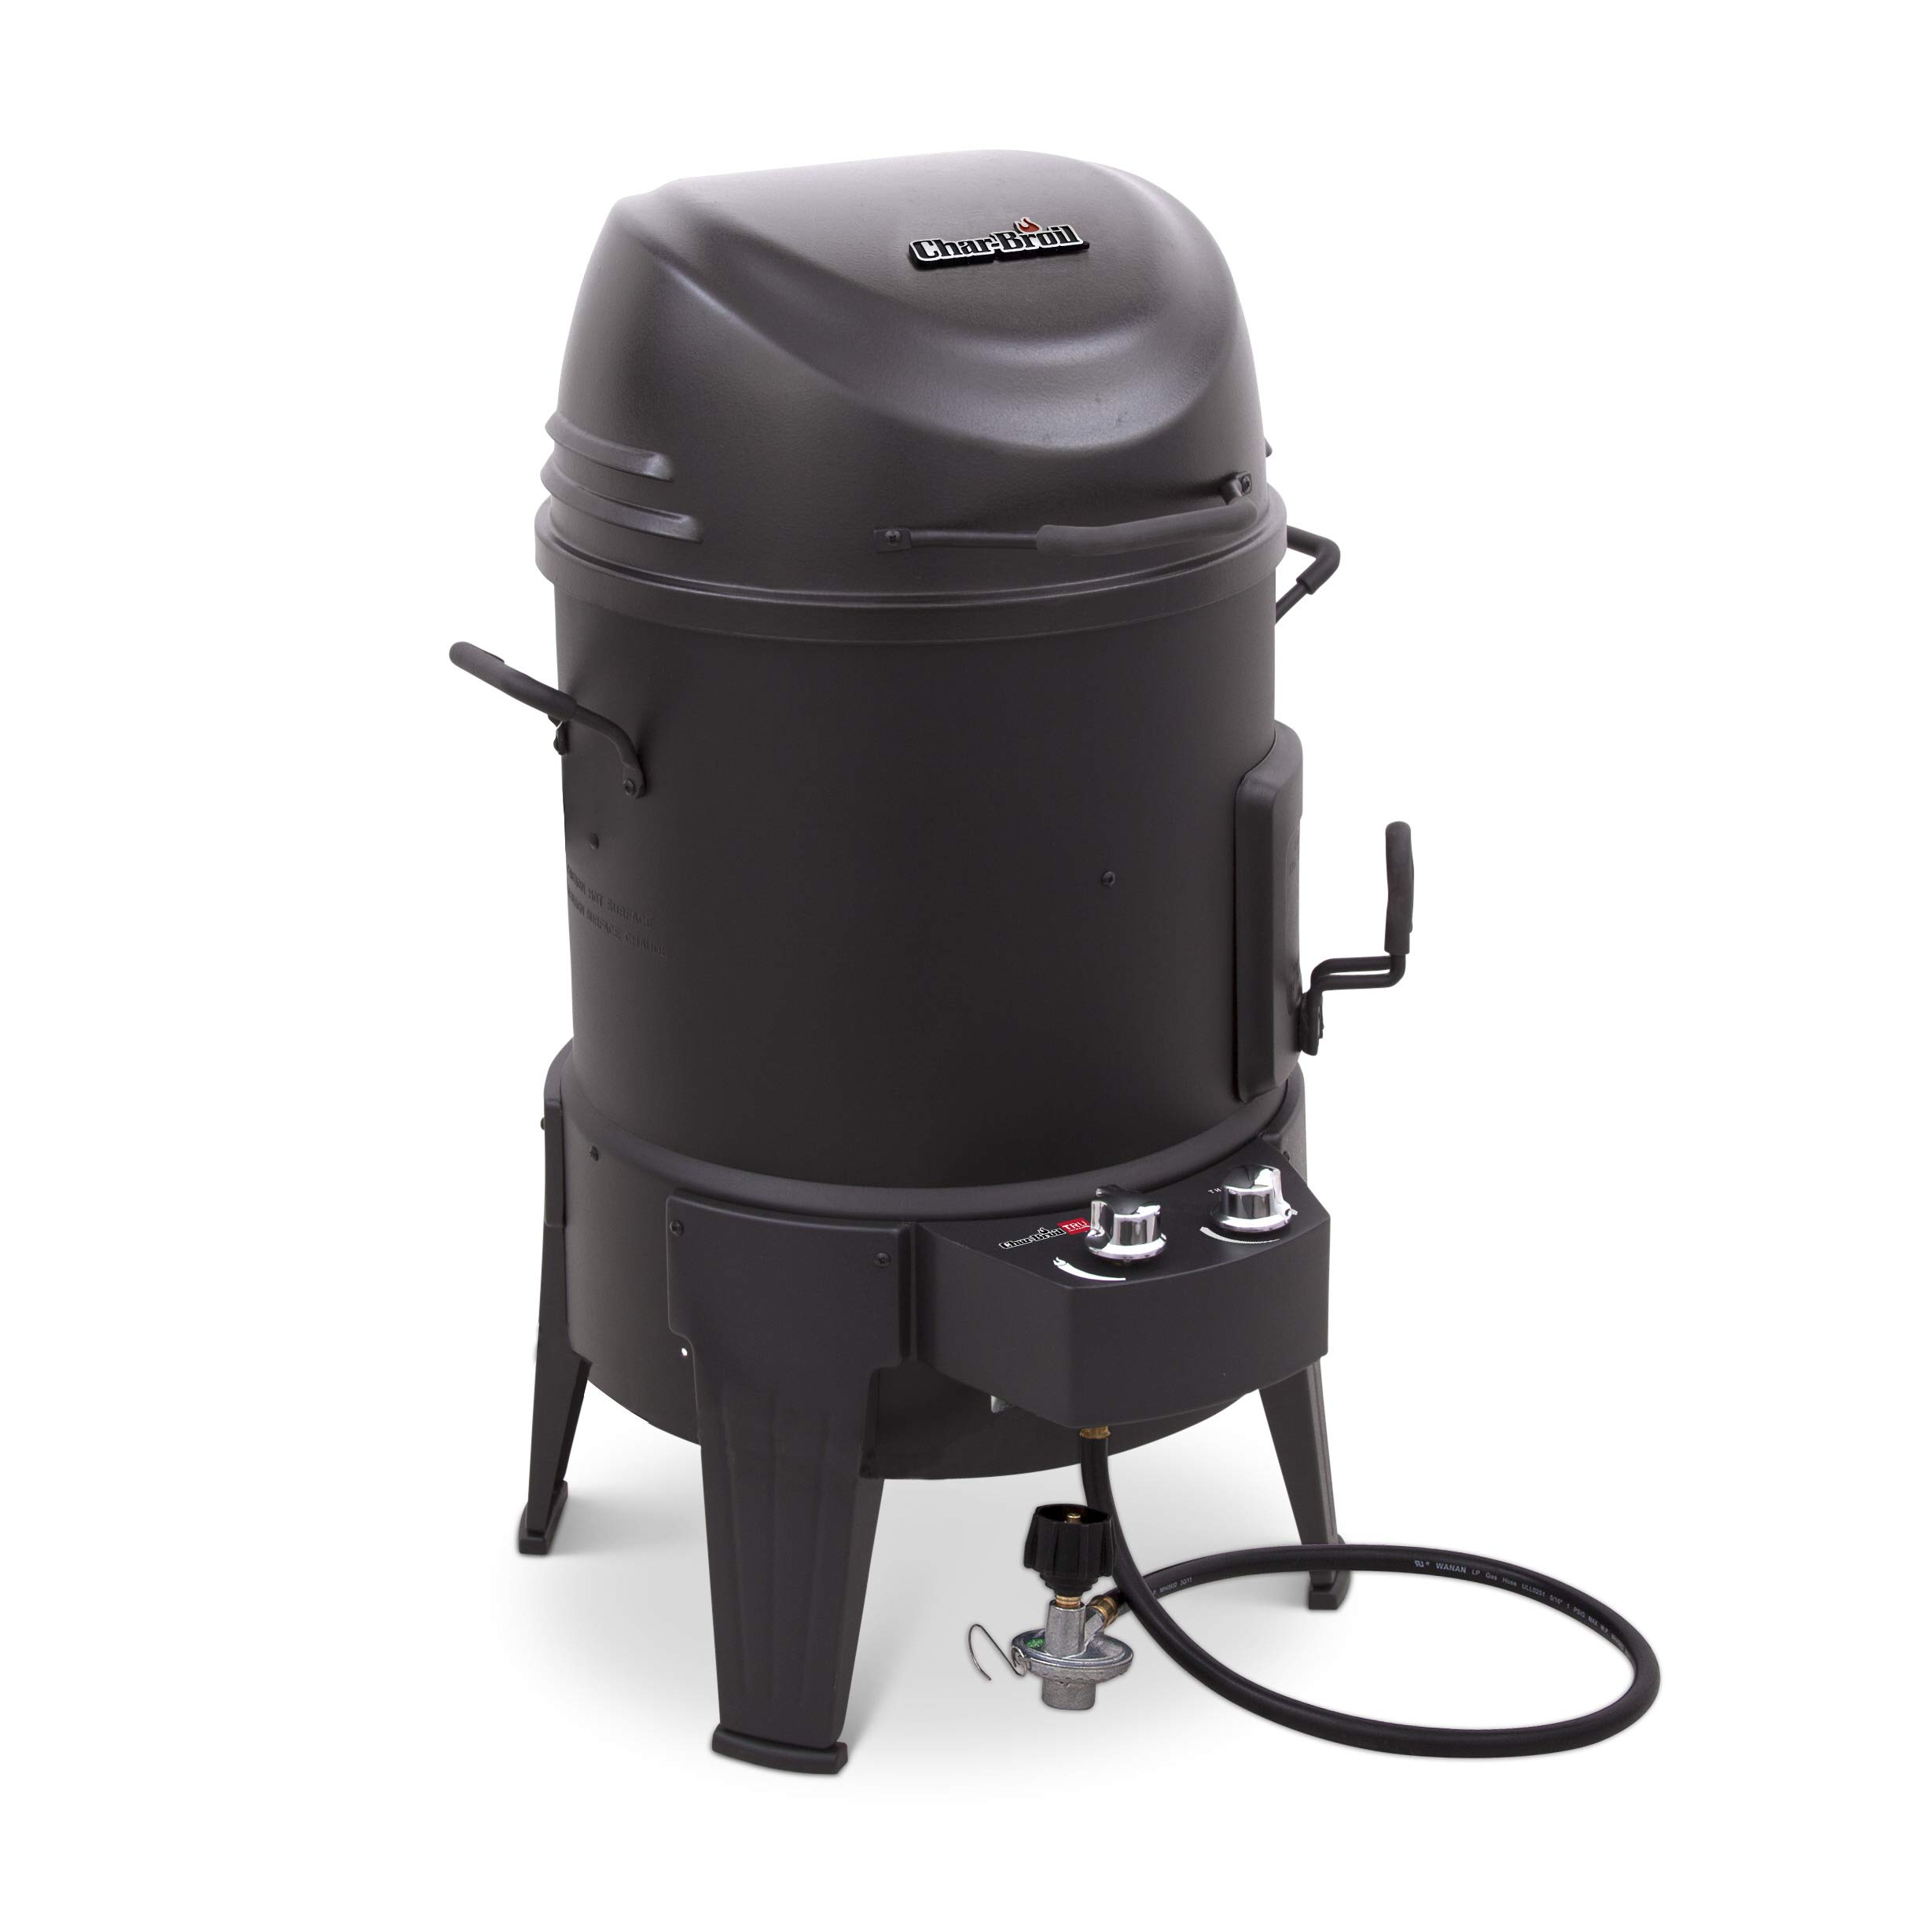 Char-Broil The Big Easy TRU-Infrared Cooking Technology 3-in-1 Propane Gas Stainless Steel Smoker, Roaster & Grill